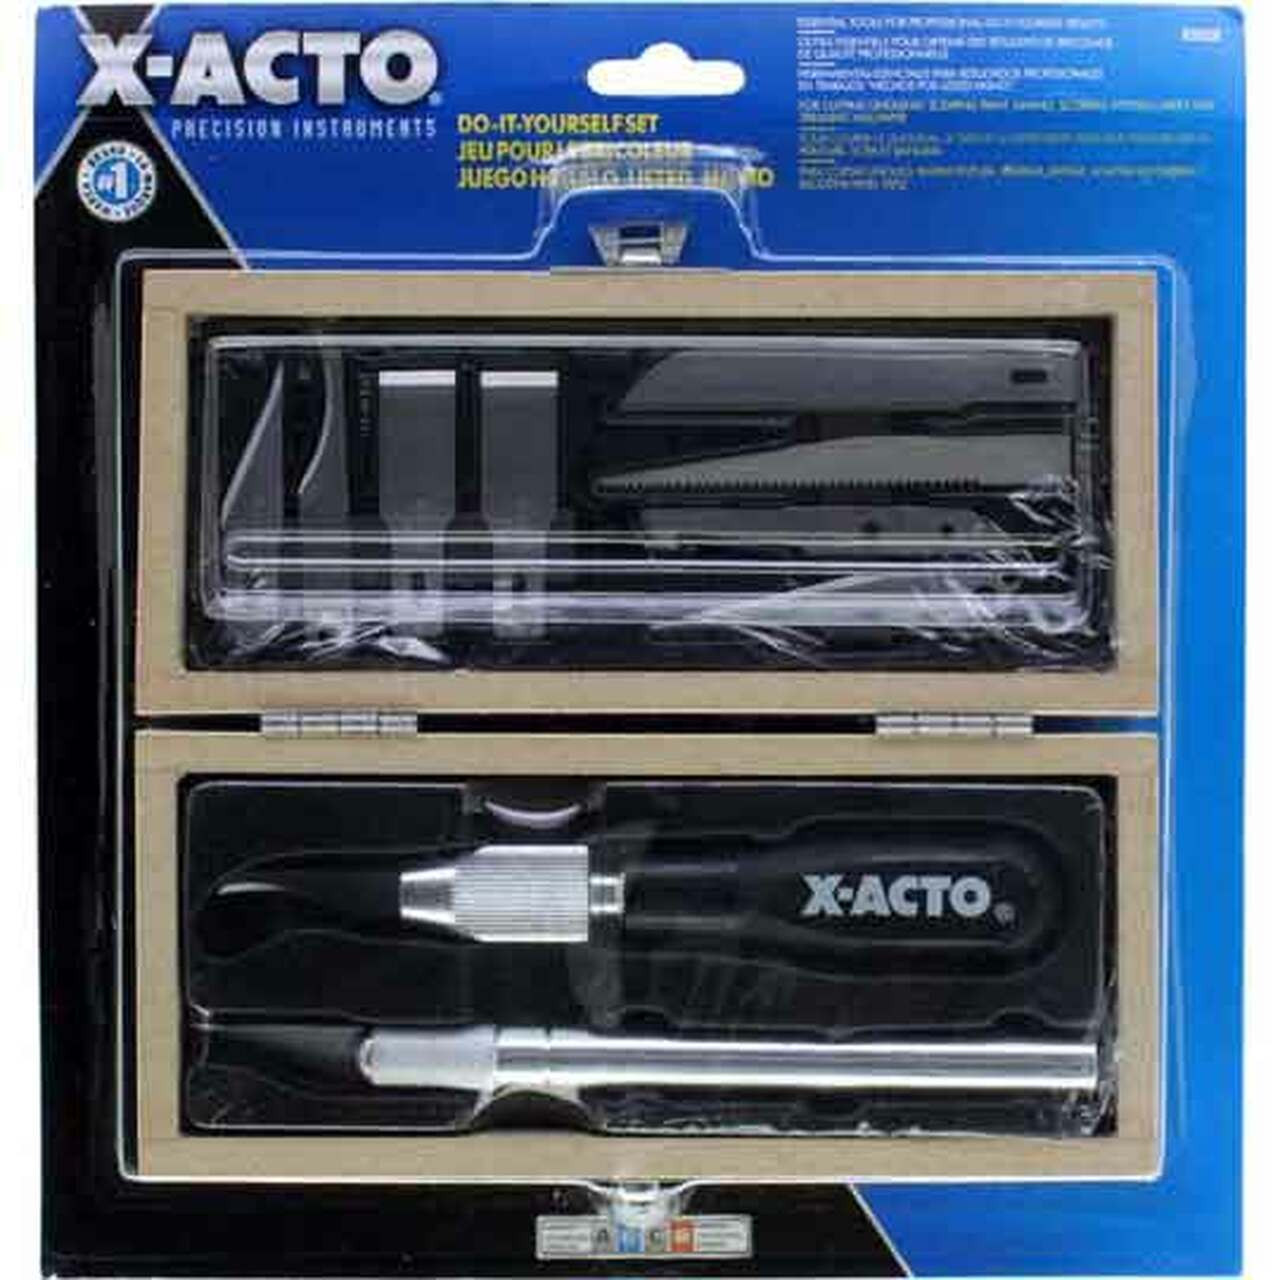 X-Acto Knife Set -and- Dremel Rotary Tool Set. Two items